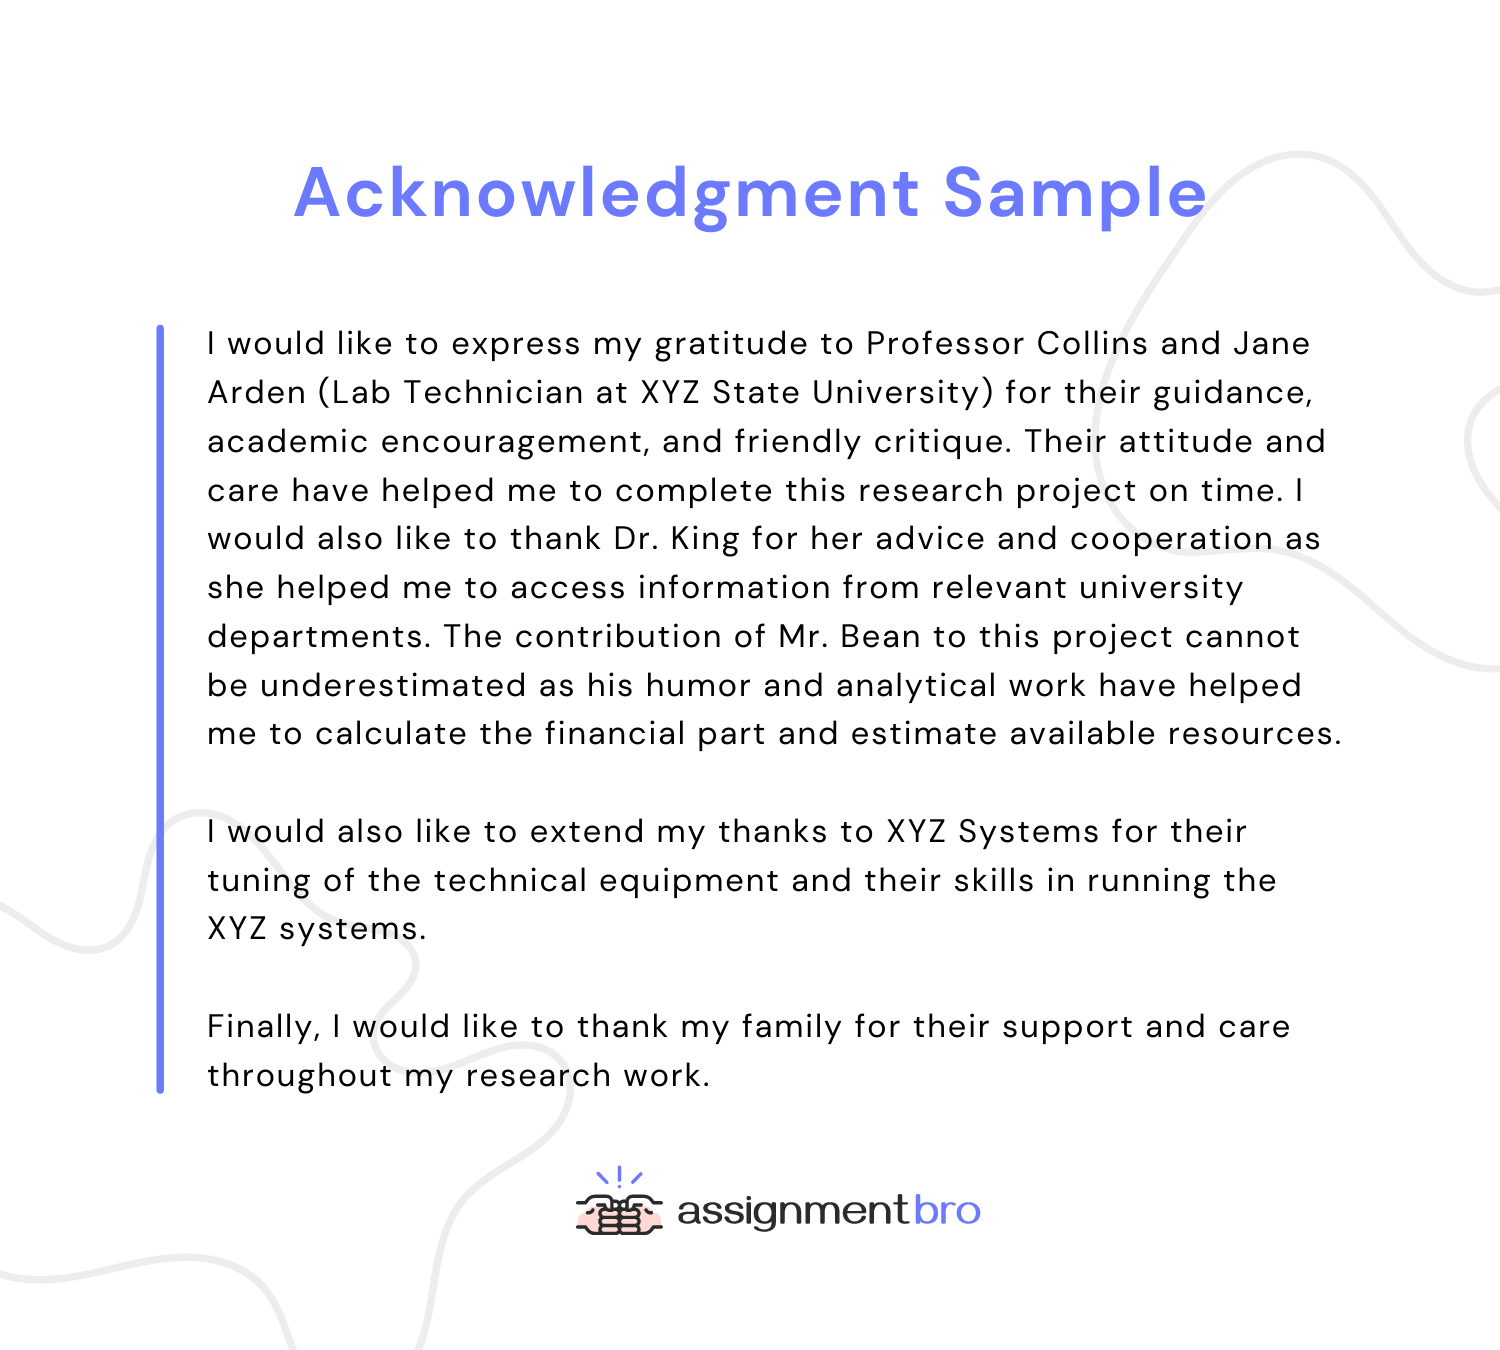 Sample of an Acknowledgement 